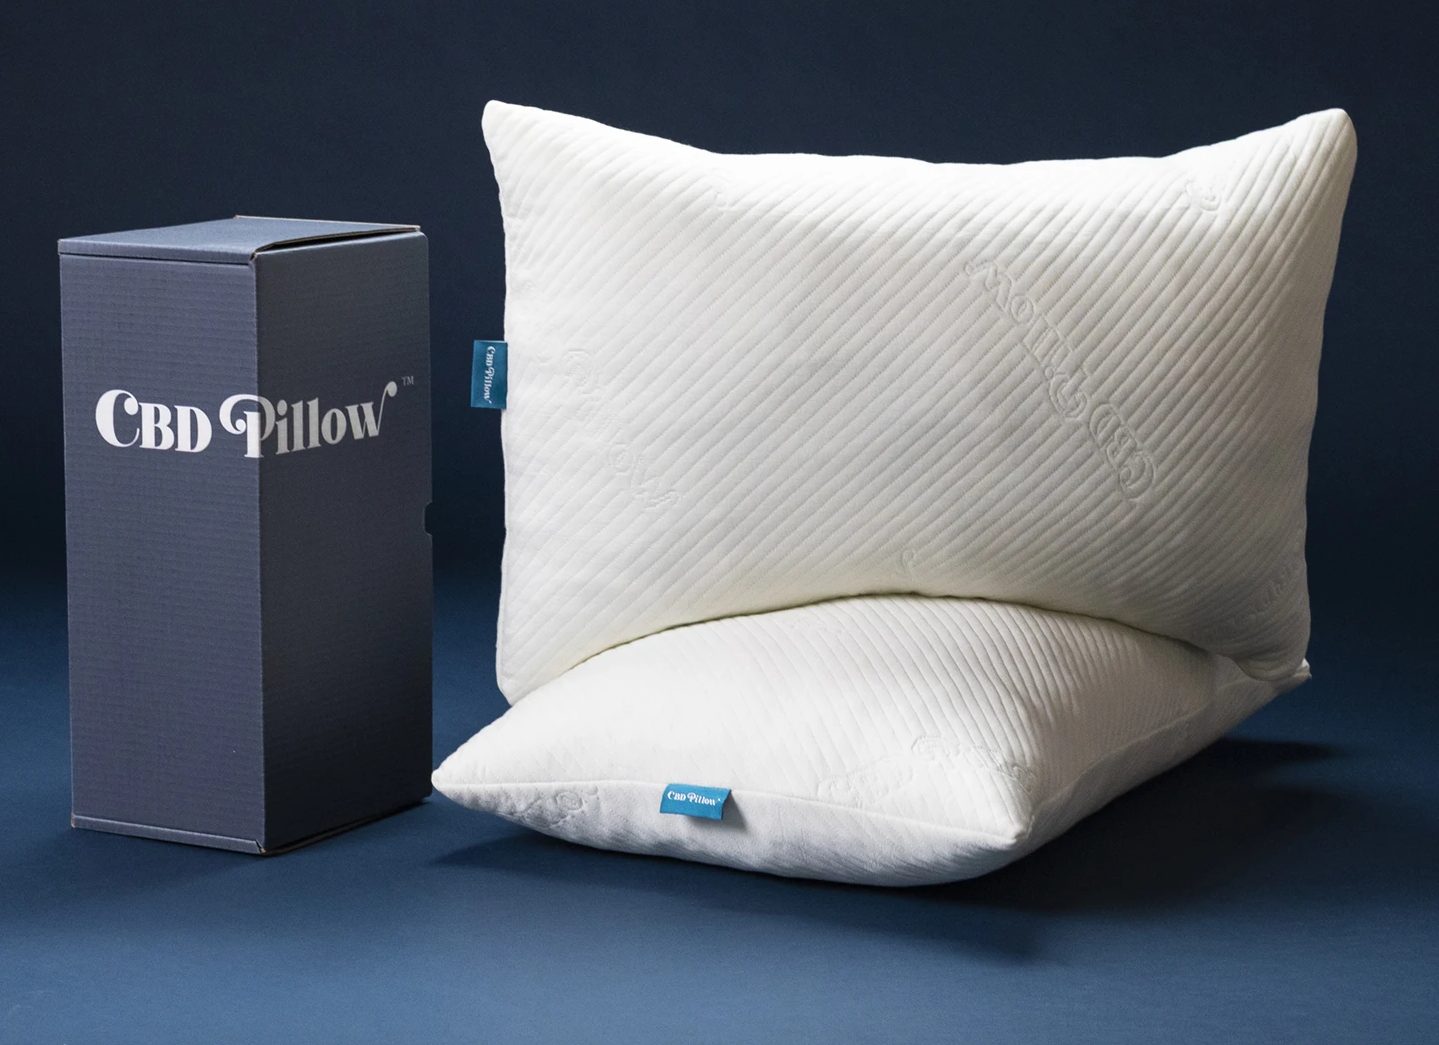 The CBD Pillow, which features a pillowcase infused with CBD.